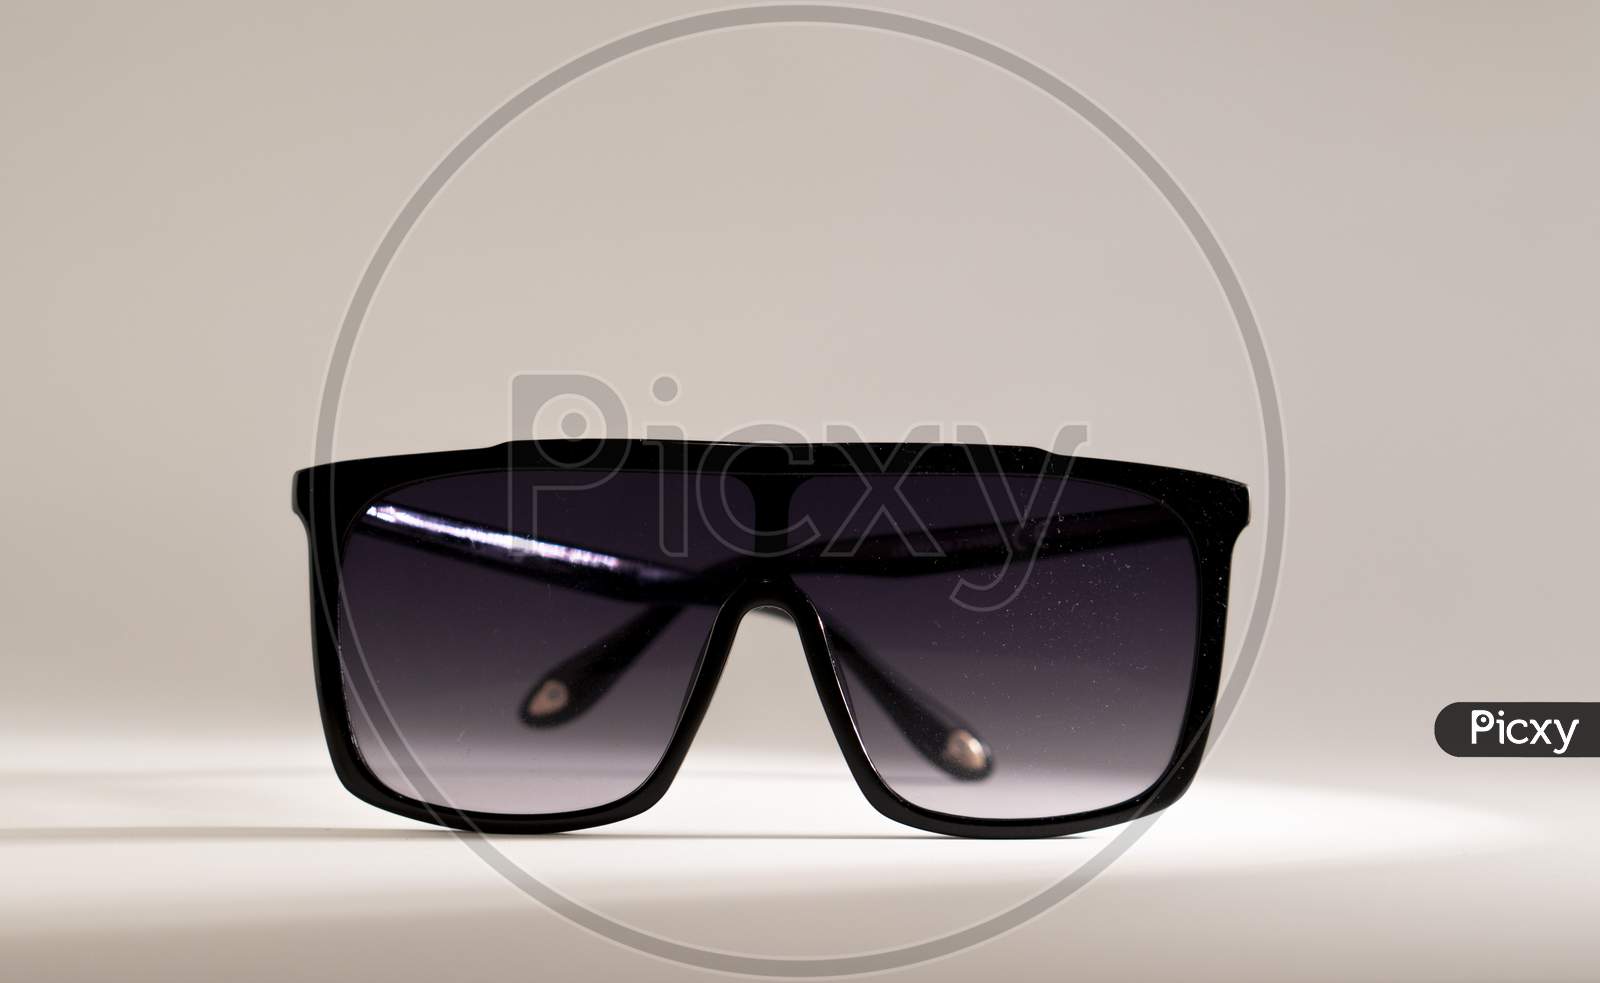 Oversized shaded sunglass on a white background